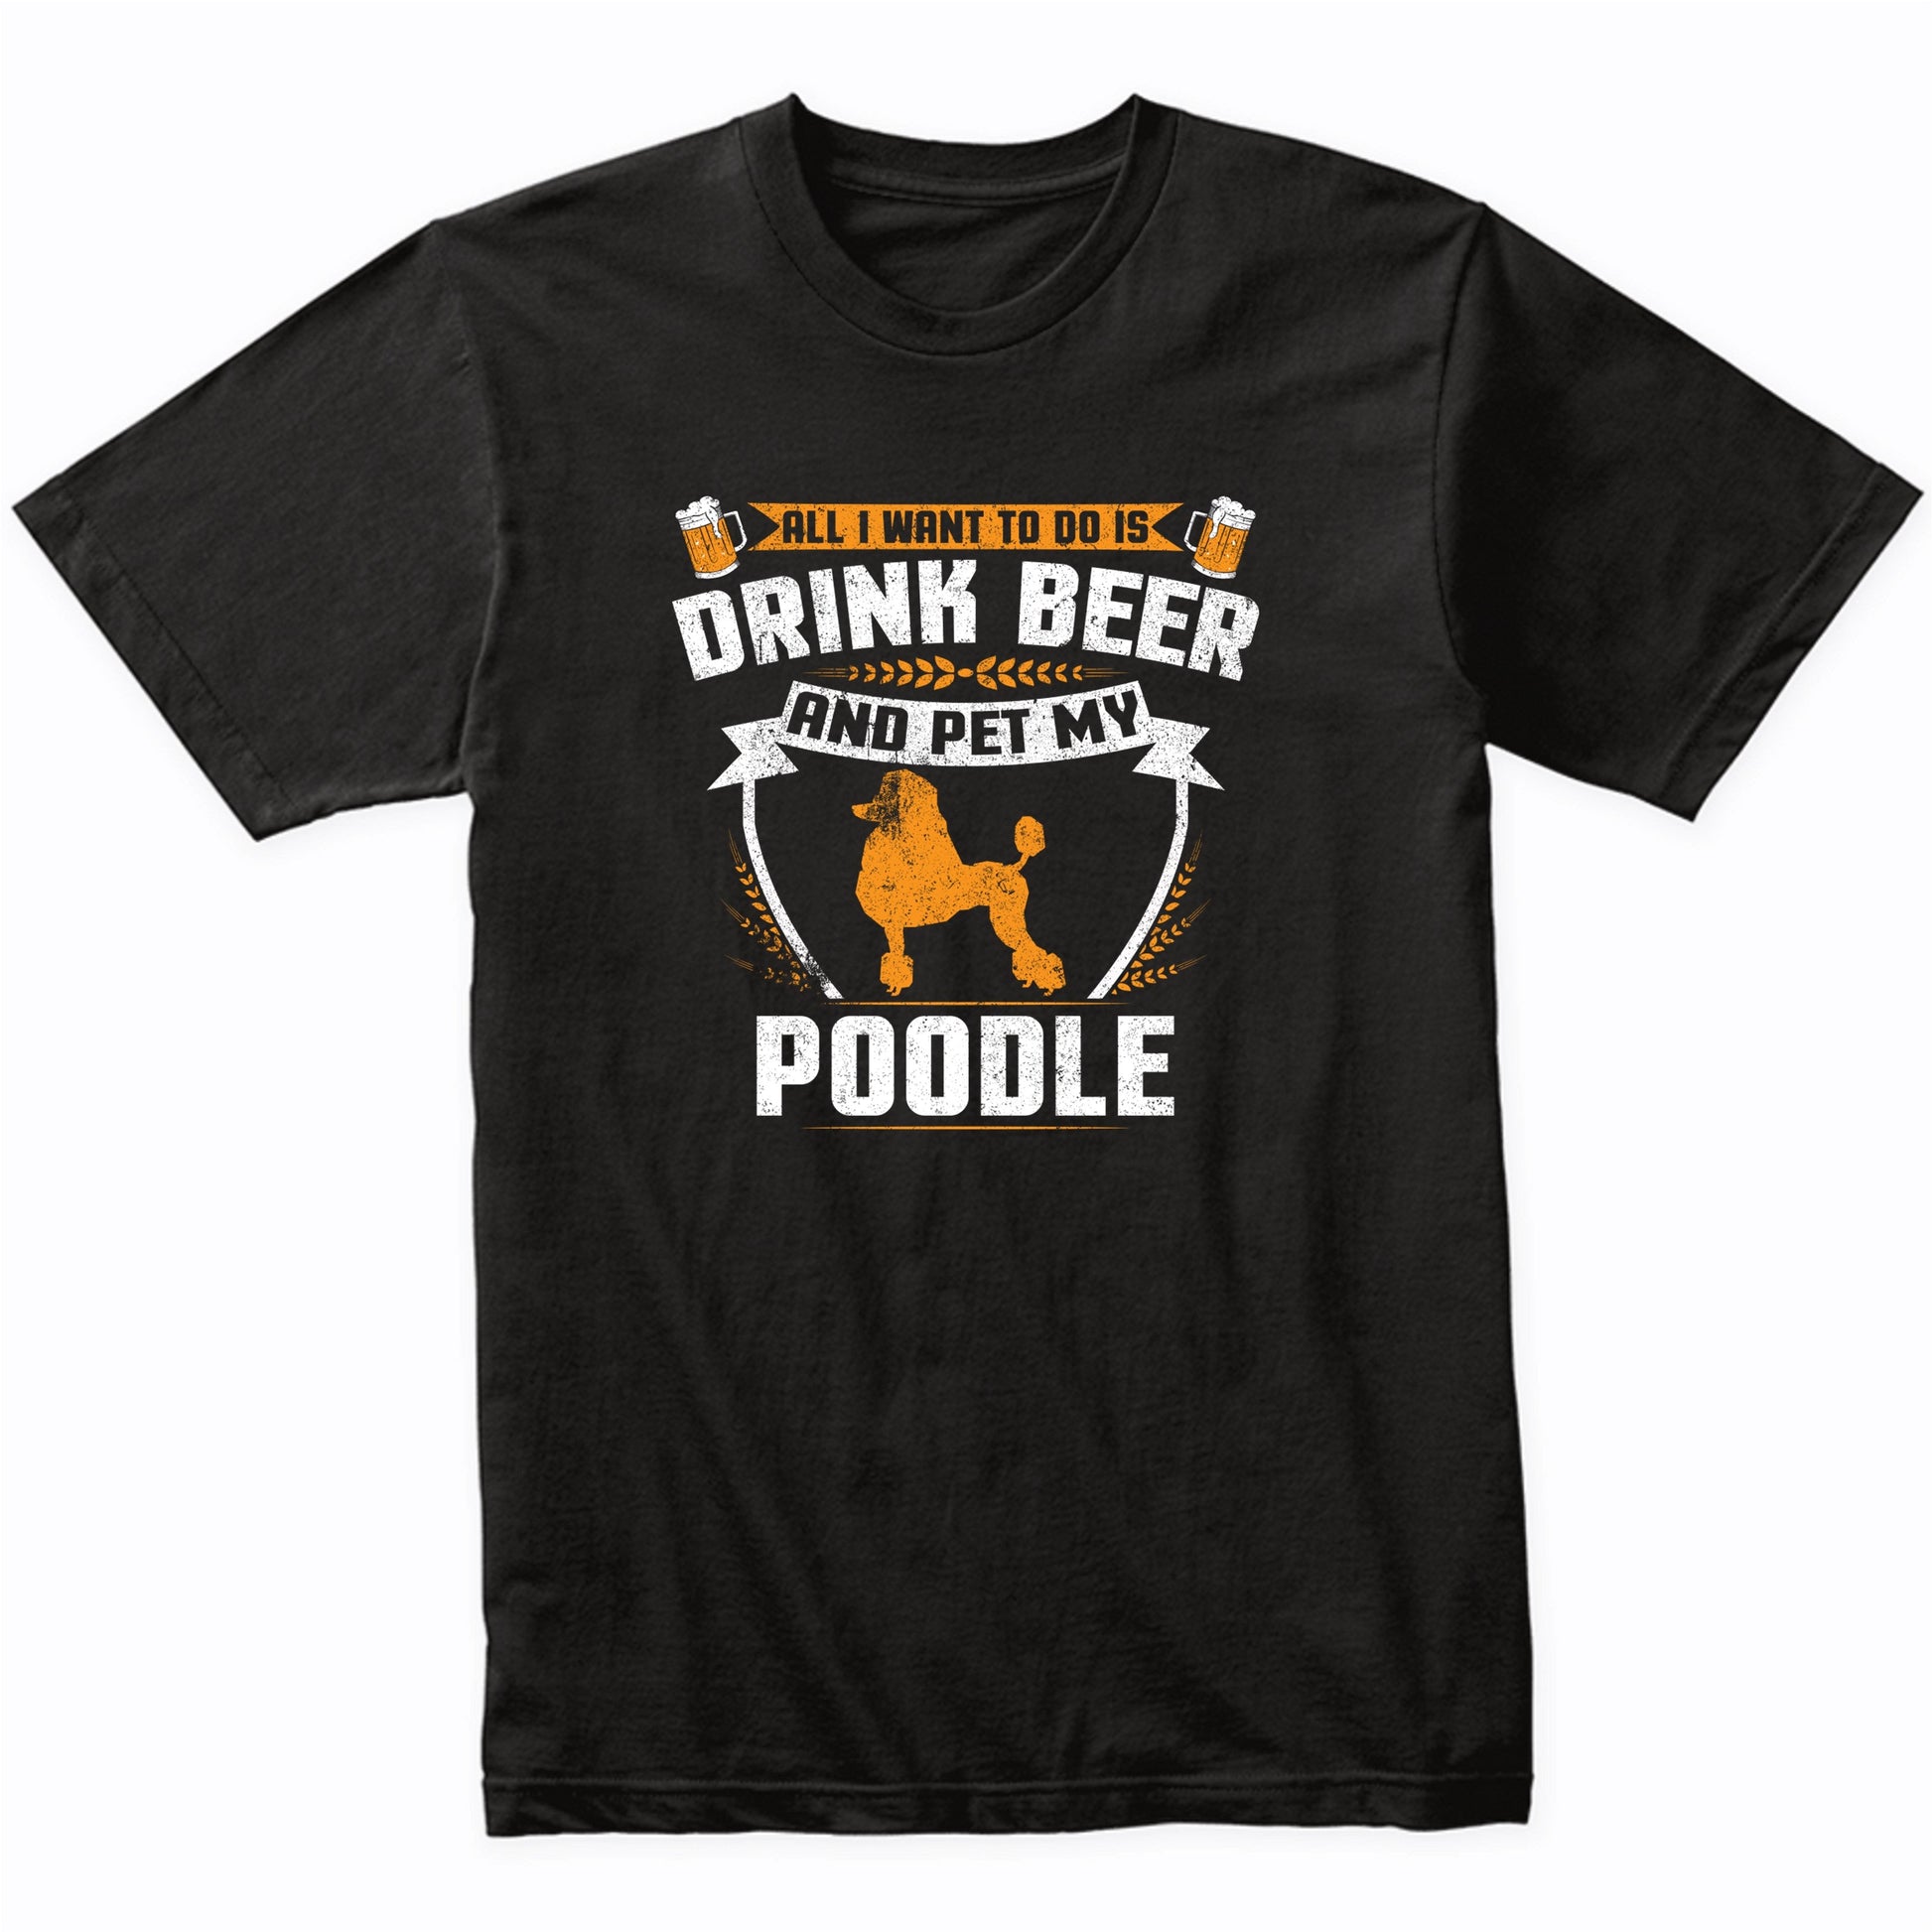 All I Want To Do Is Drink Beer And Pet My Poodle Funny Dog Owner Shirt